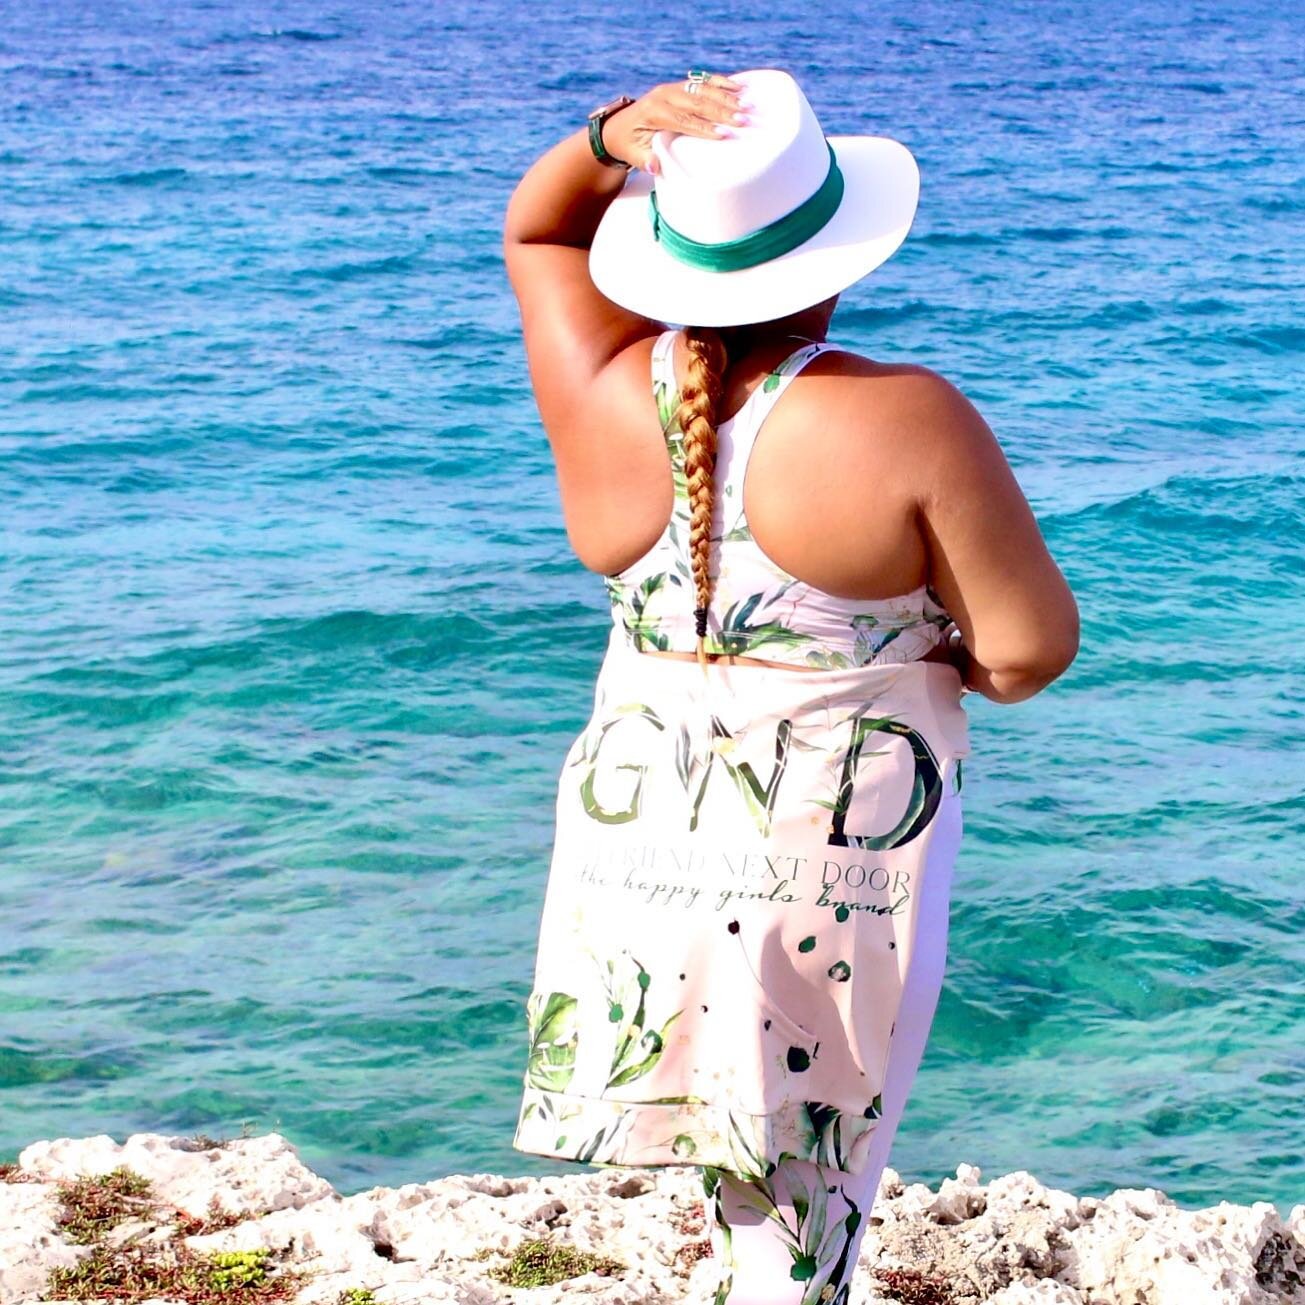 Travel Leisure Brand 

What should a girl do when it comes to travel and fashion? Shop at The Happy Girls Brand. 

YGND, The Happy Girls Brand

Your Girlfriend Next Door

#Thehappygirlsbrand #DarlingEscapes #GirlsWhoTravel #curacao #travelleisurebran